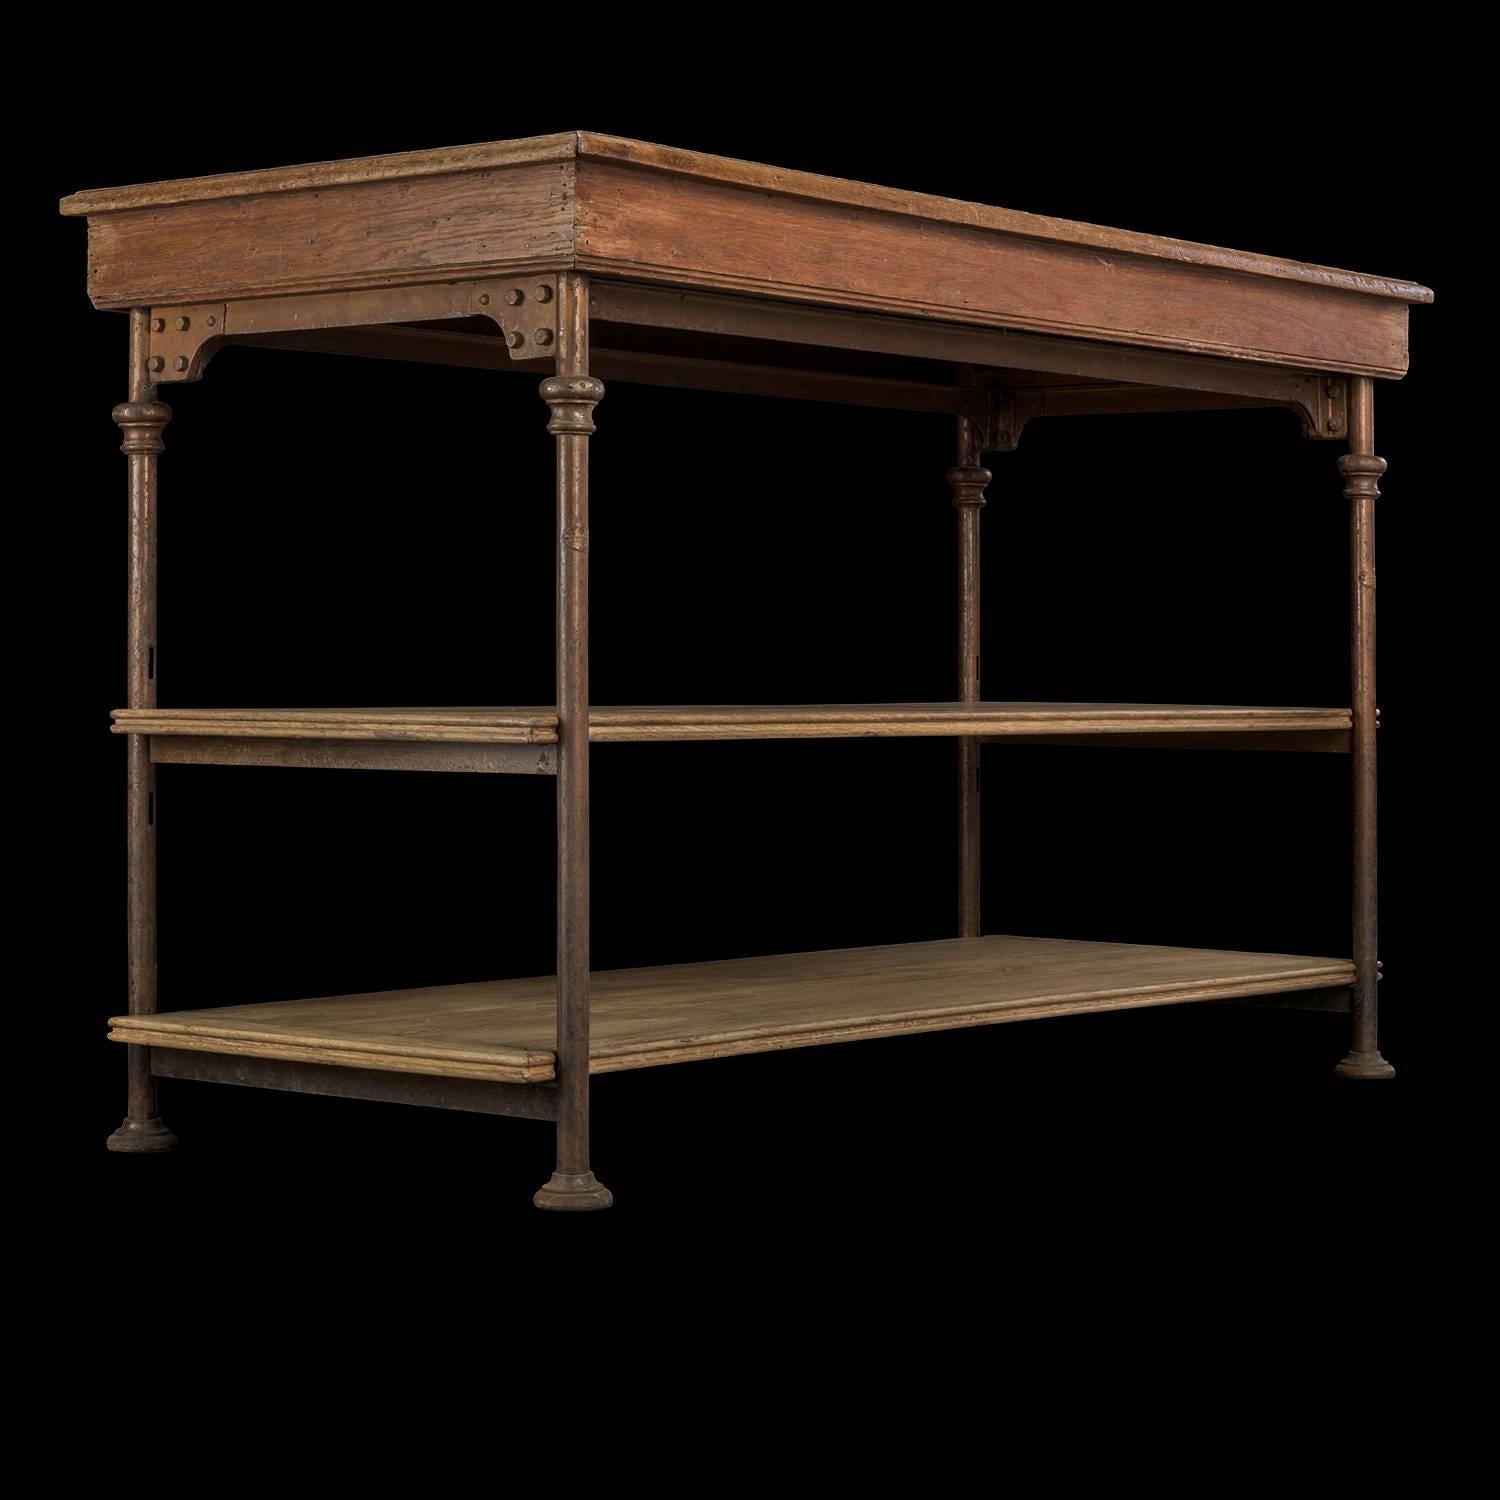 Theodore Scherf Oak and Iron Drapers Tables, circa 1890.

Iron structure with oak surfaces. Original color and patina. Three adjustable height position for the intermediate tray. Manufactured by TH SCHERF 49 rue Lauriston - Paris.

